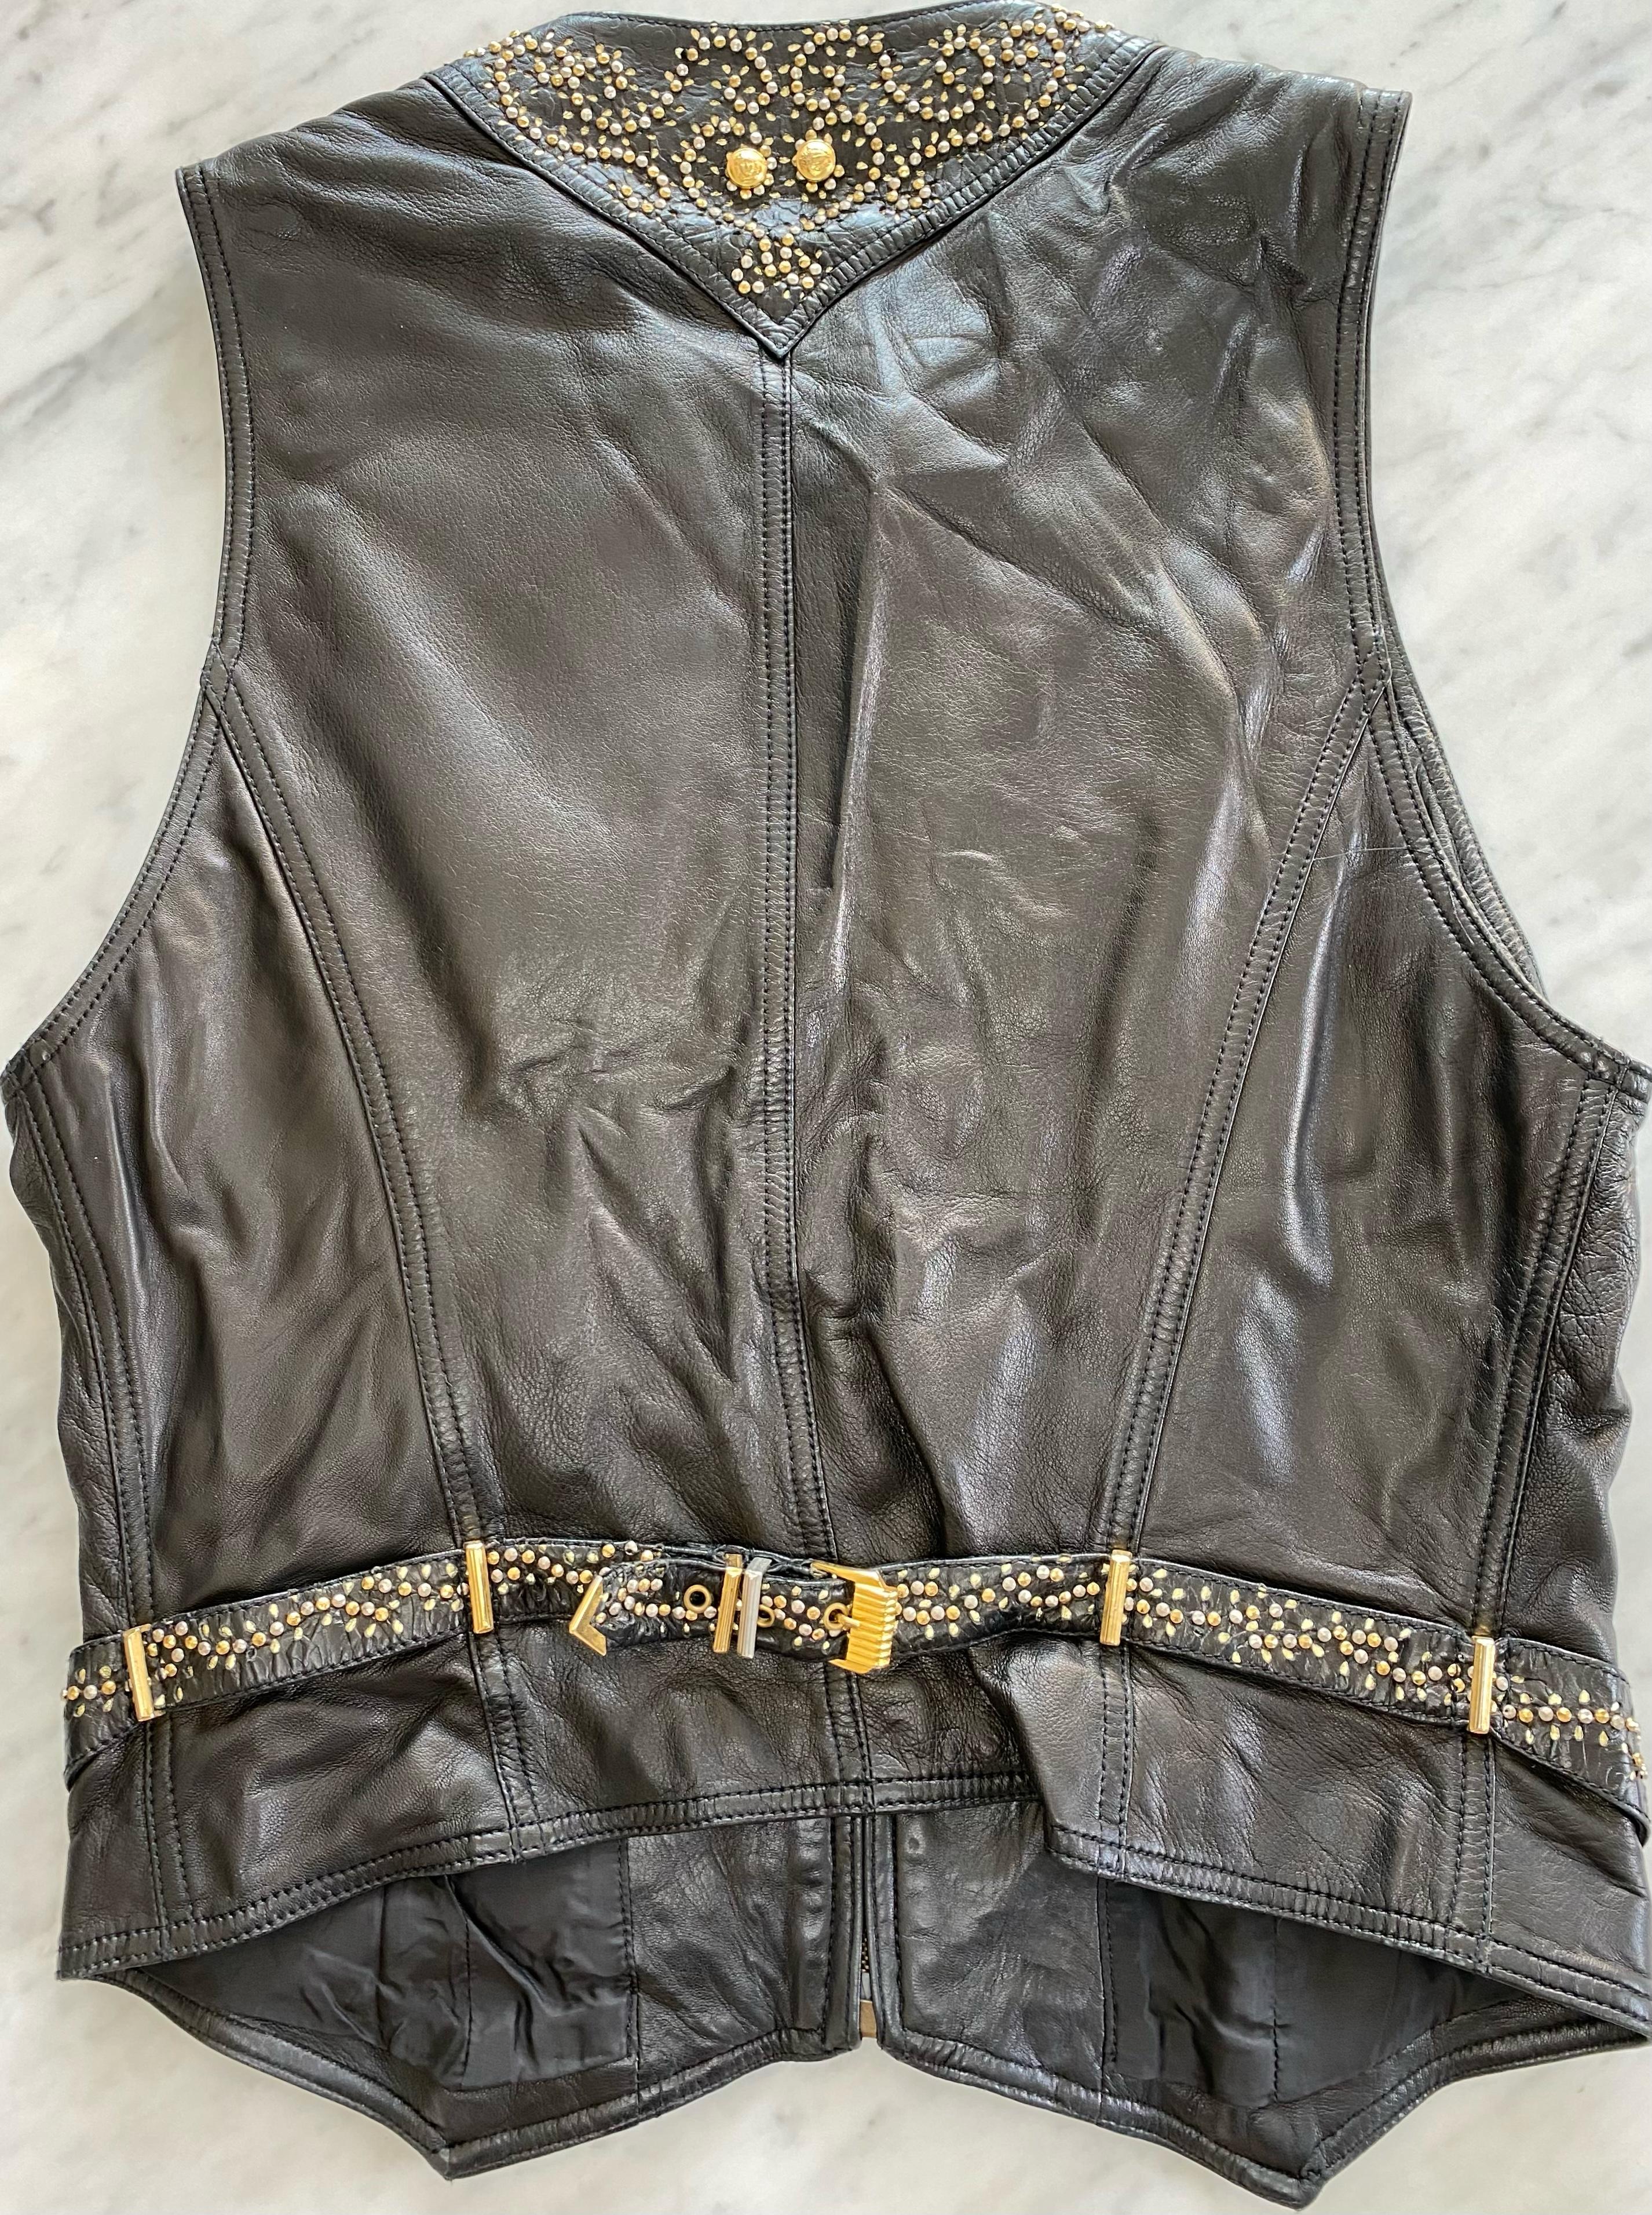 F/W 1992 Gianni Versace 'Miss S&M' Studded Leather Vest Medusa Accents For Sale 2